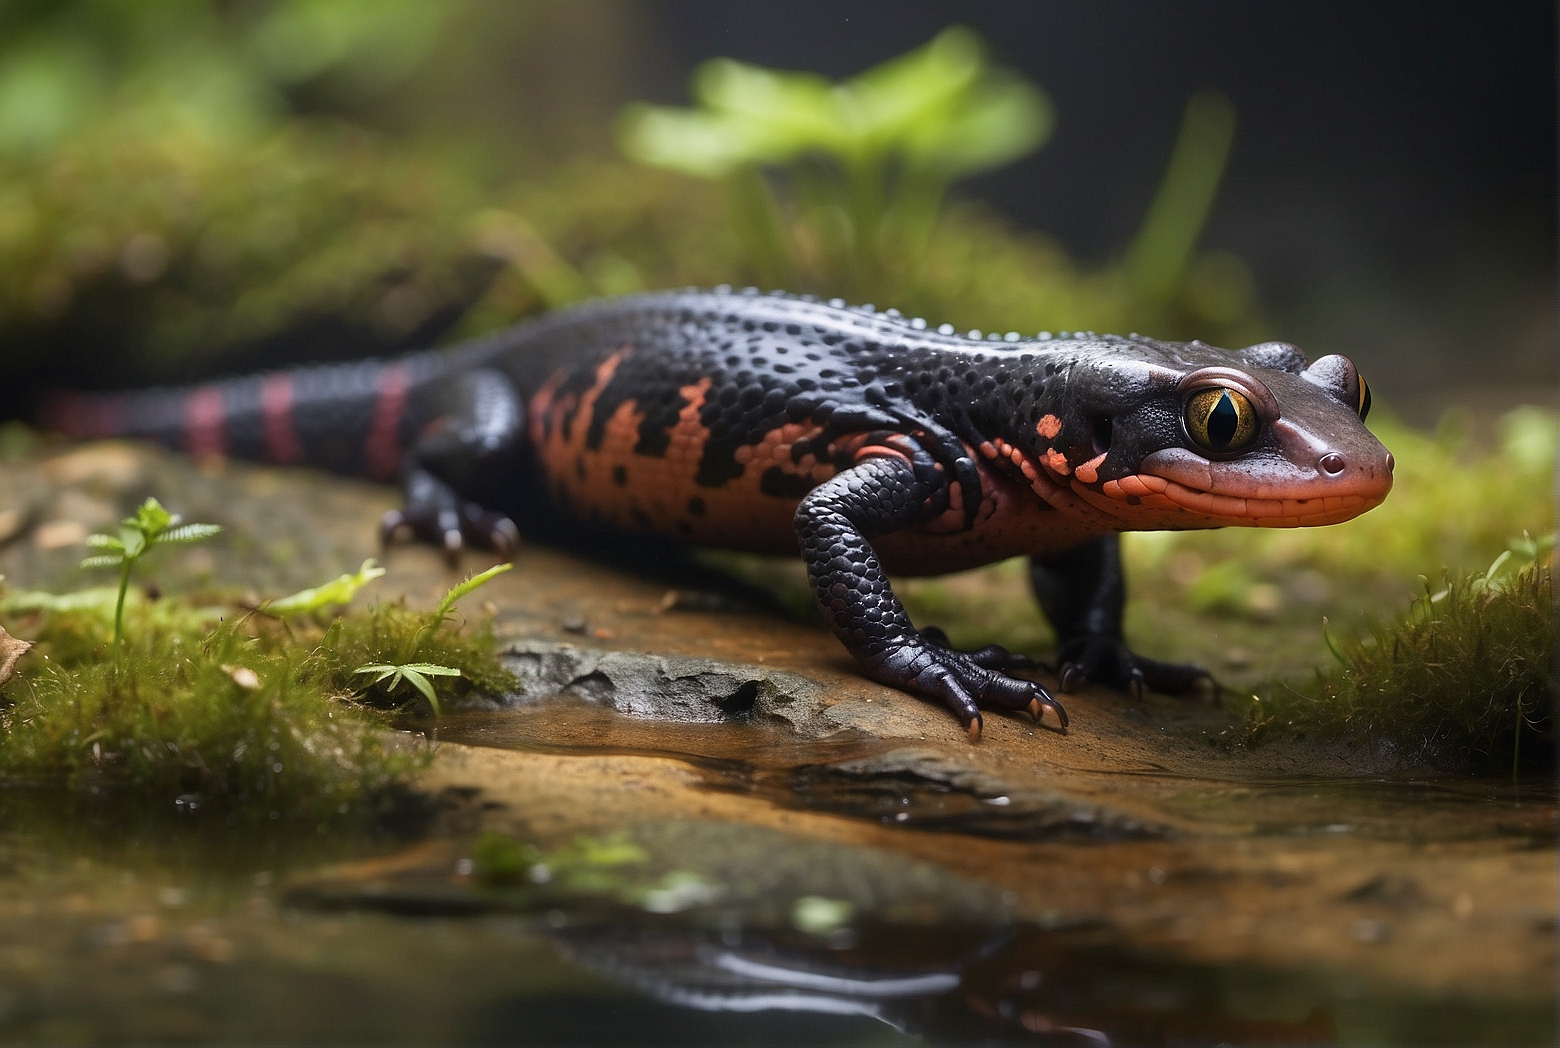 The Duration of Fasting for Salamanders